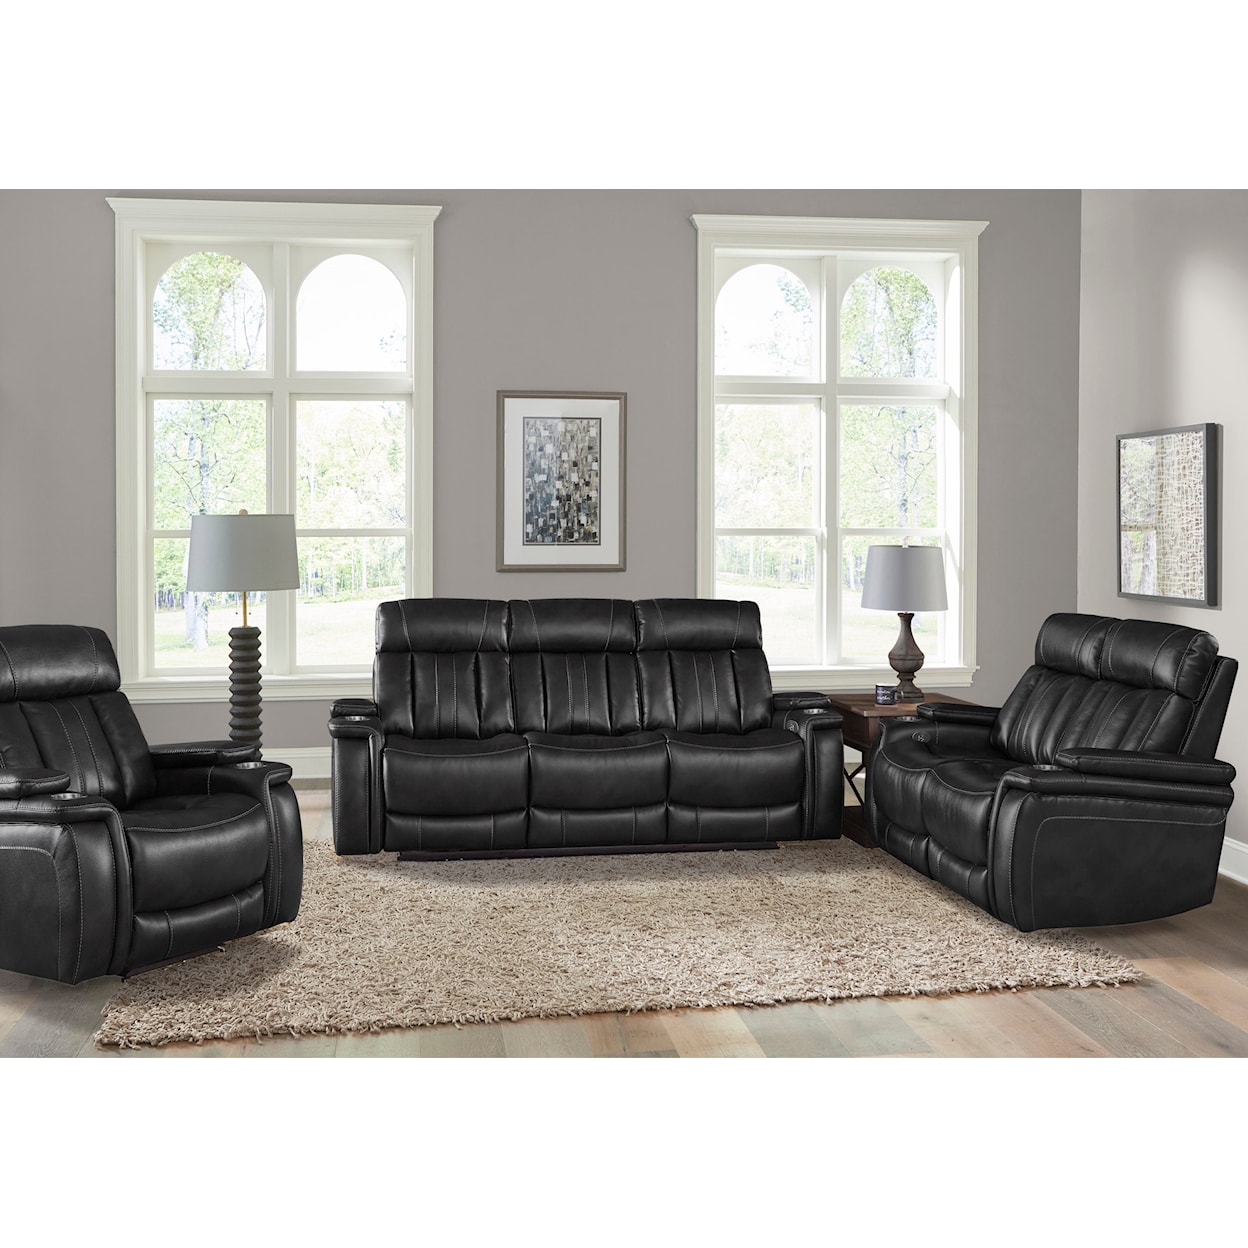 Paramount Living Royce Living Room Collection